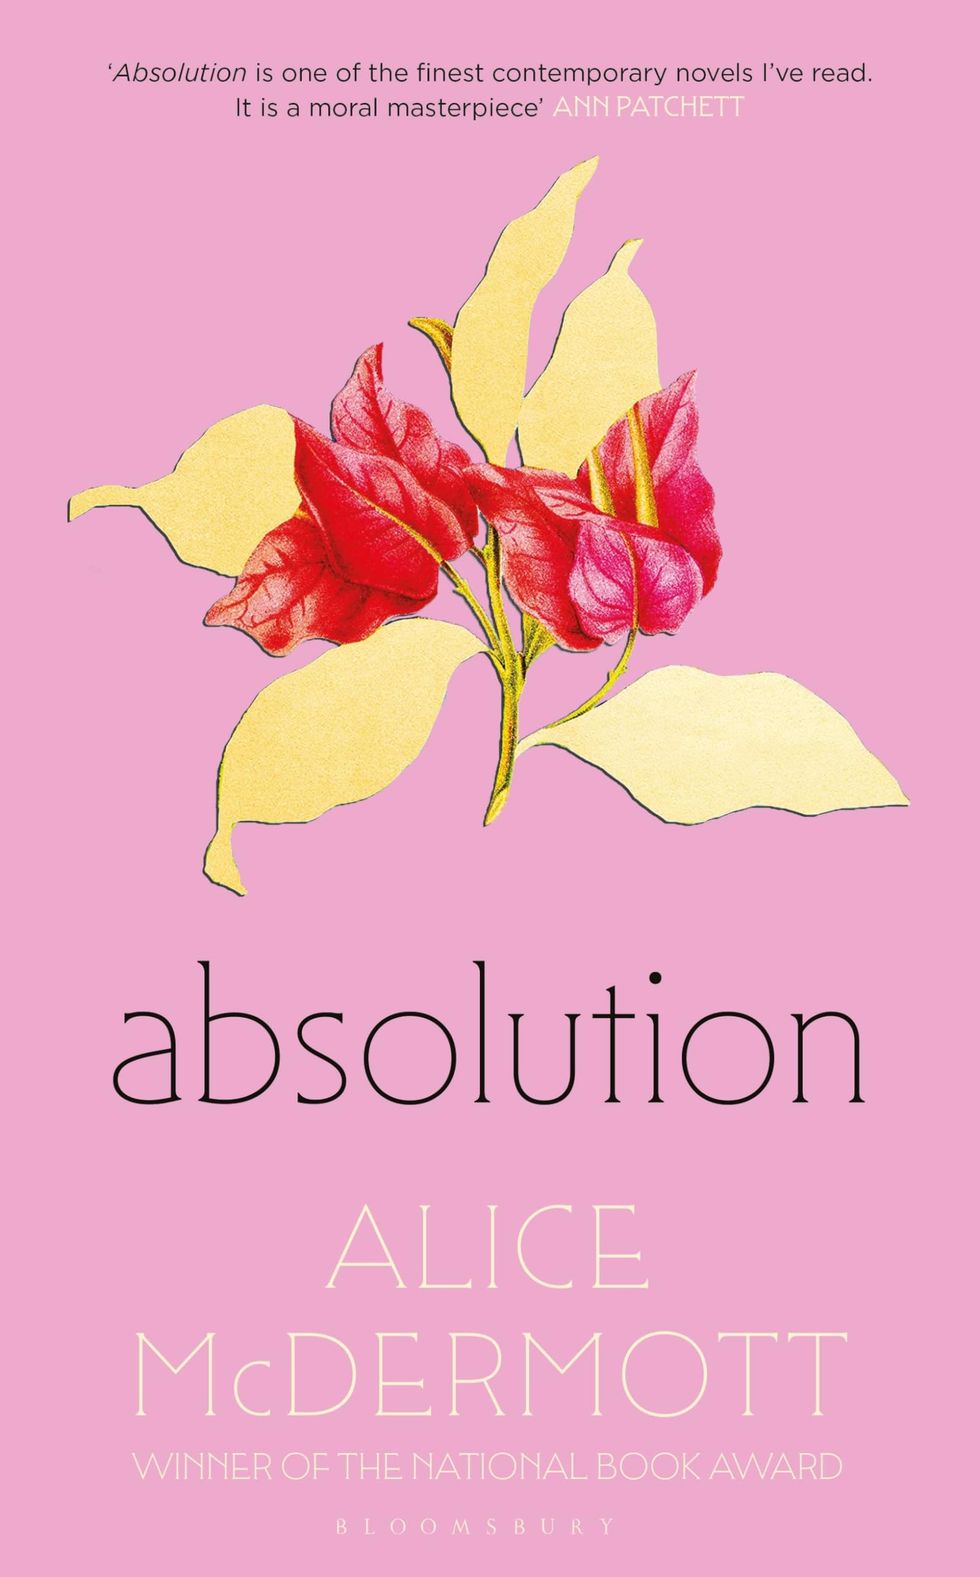 Absolution by alice McDermott